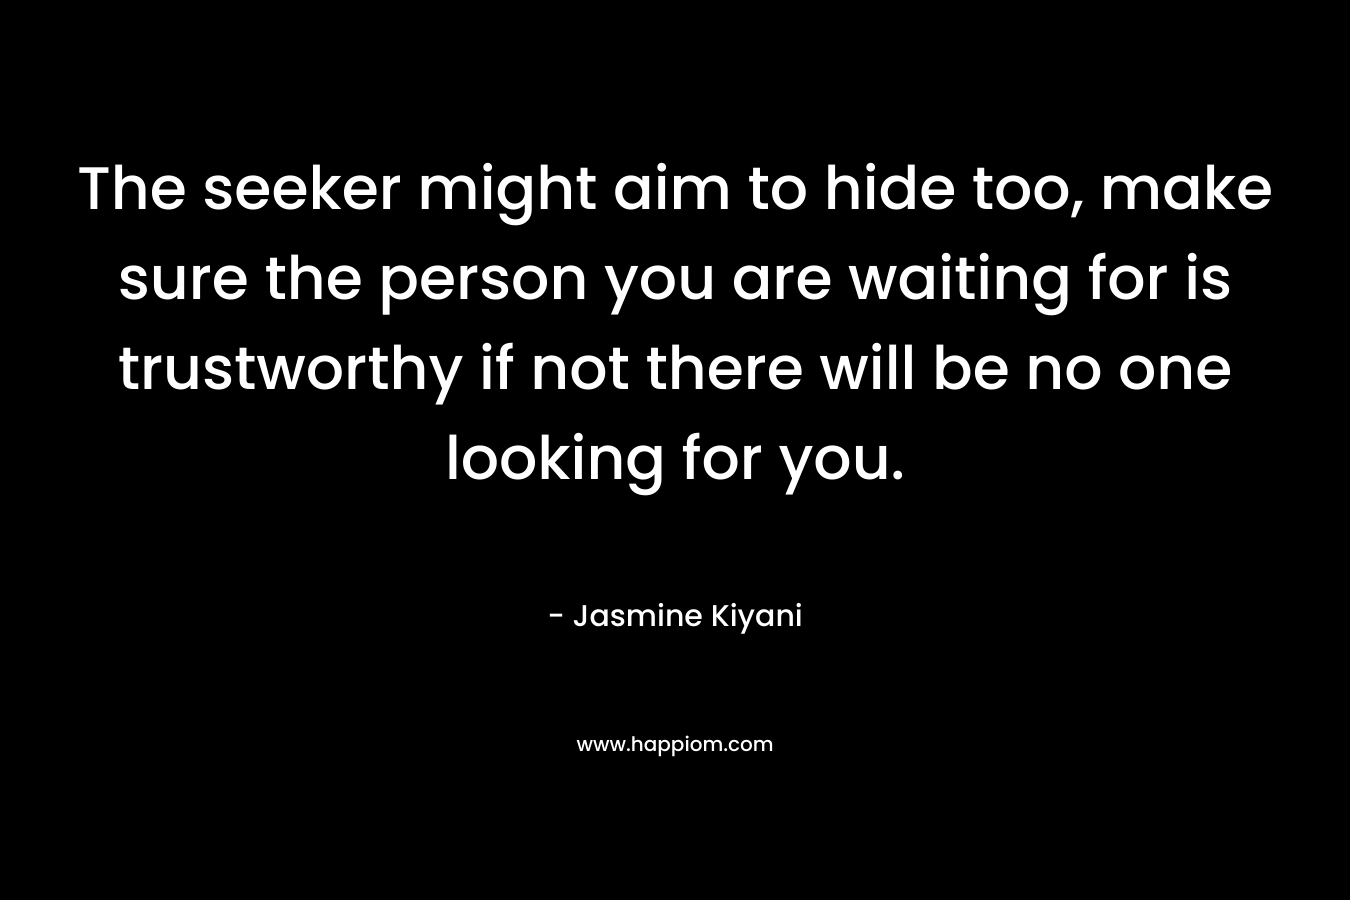 The seeker might aim to hide too, make sure the person you are waiting for is trustworthy if not there will be no one looking for you. – Jasmine Kiyani